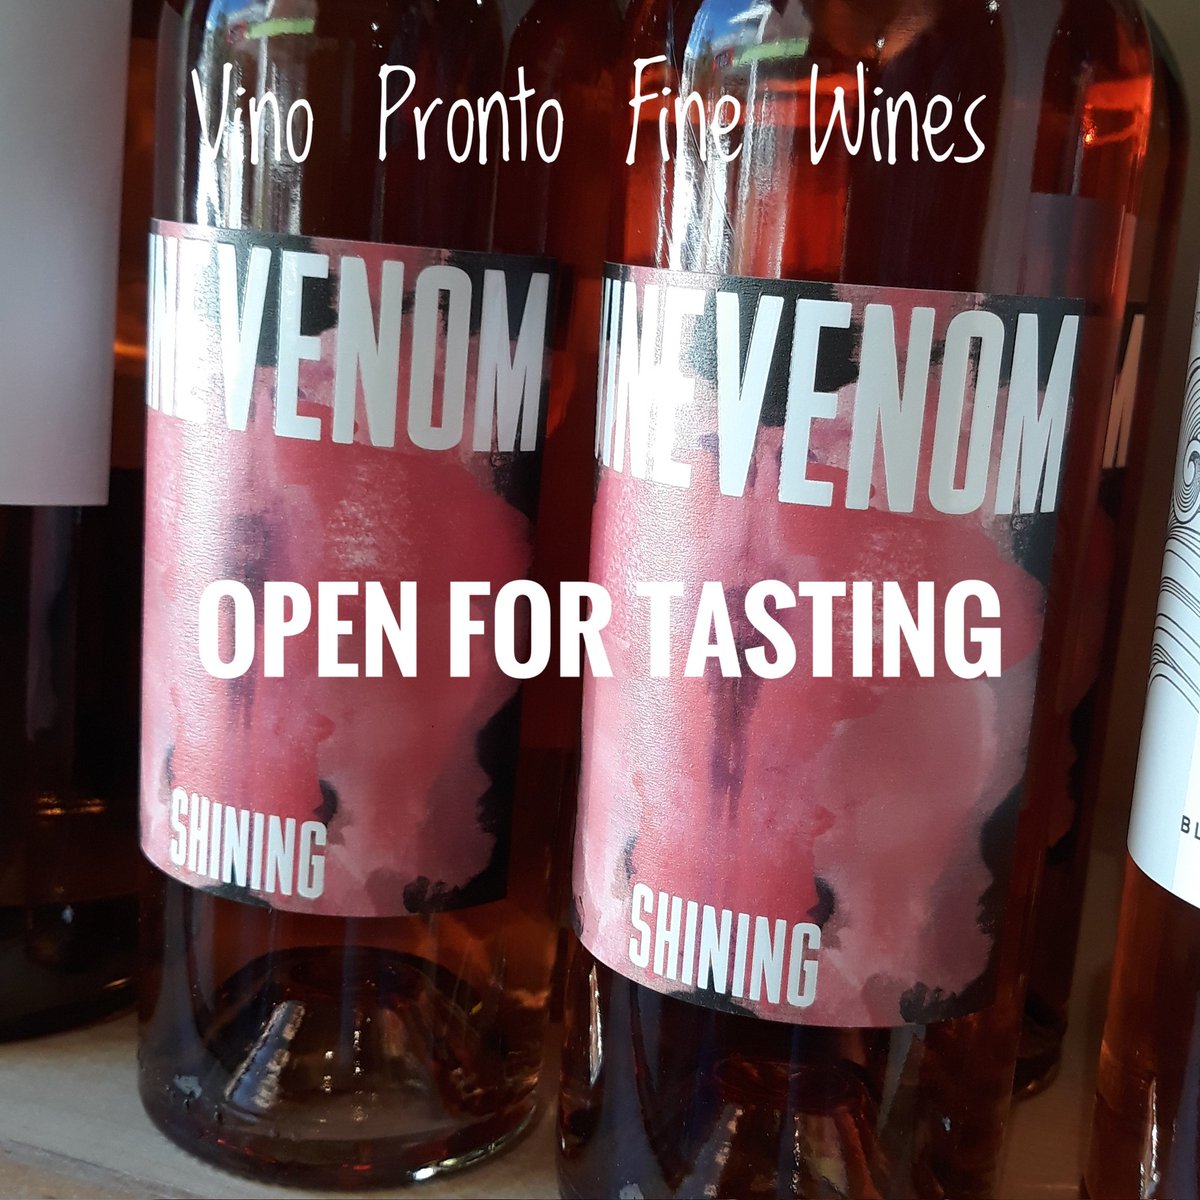 The new Vine Venom rose is available and we have a bottle open. Why not pop in for a wee taste?

#winewednesday #vinevenom #swartlandwine #florwine #vinoprontofinewines #capewines